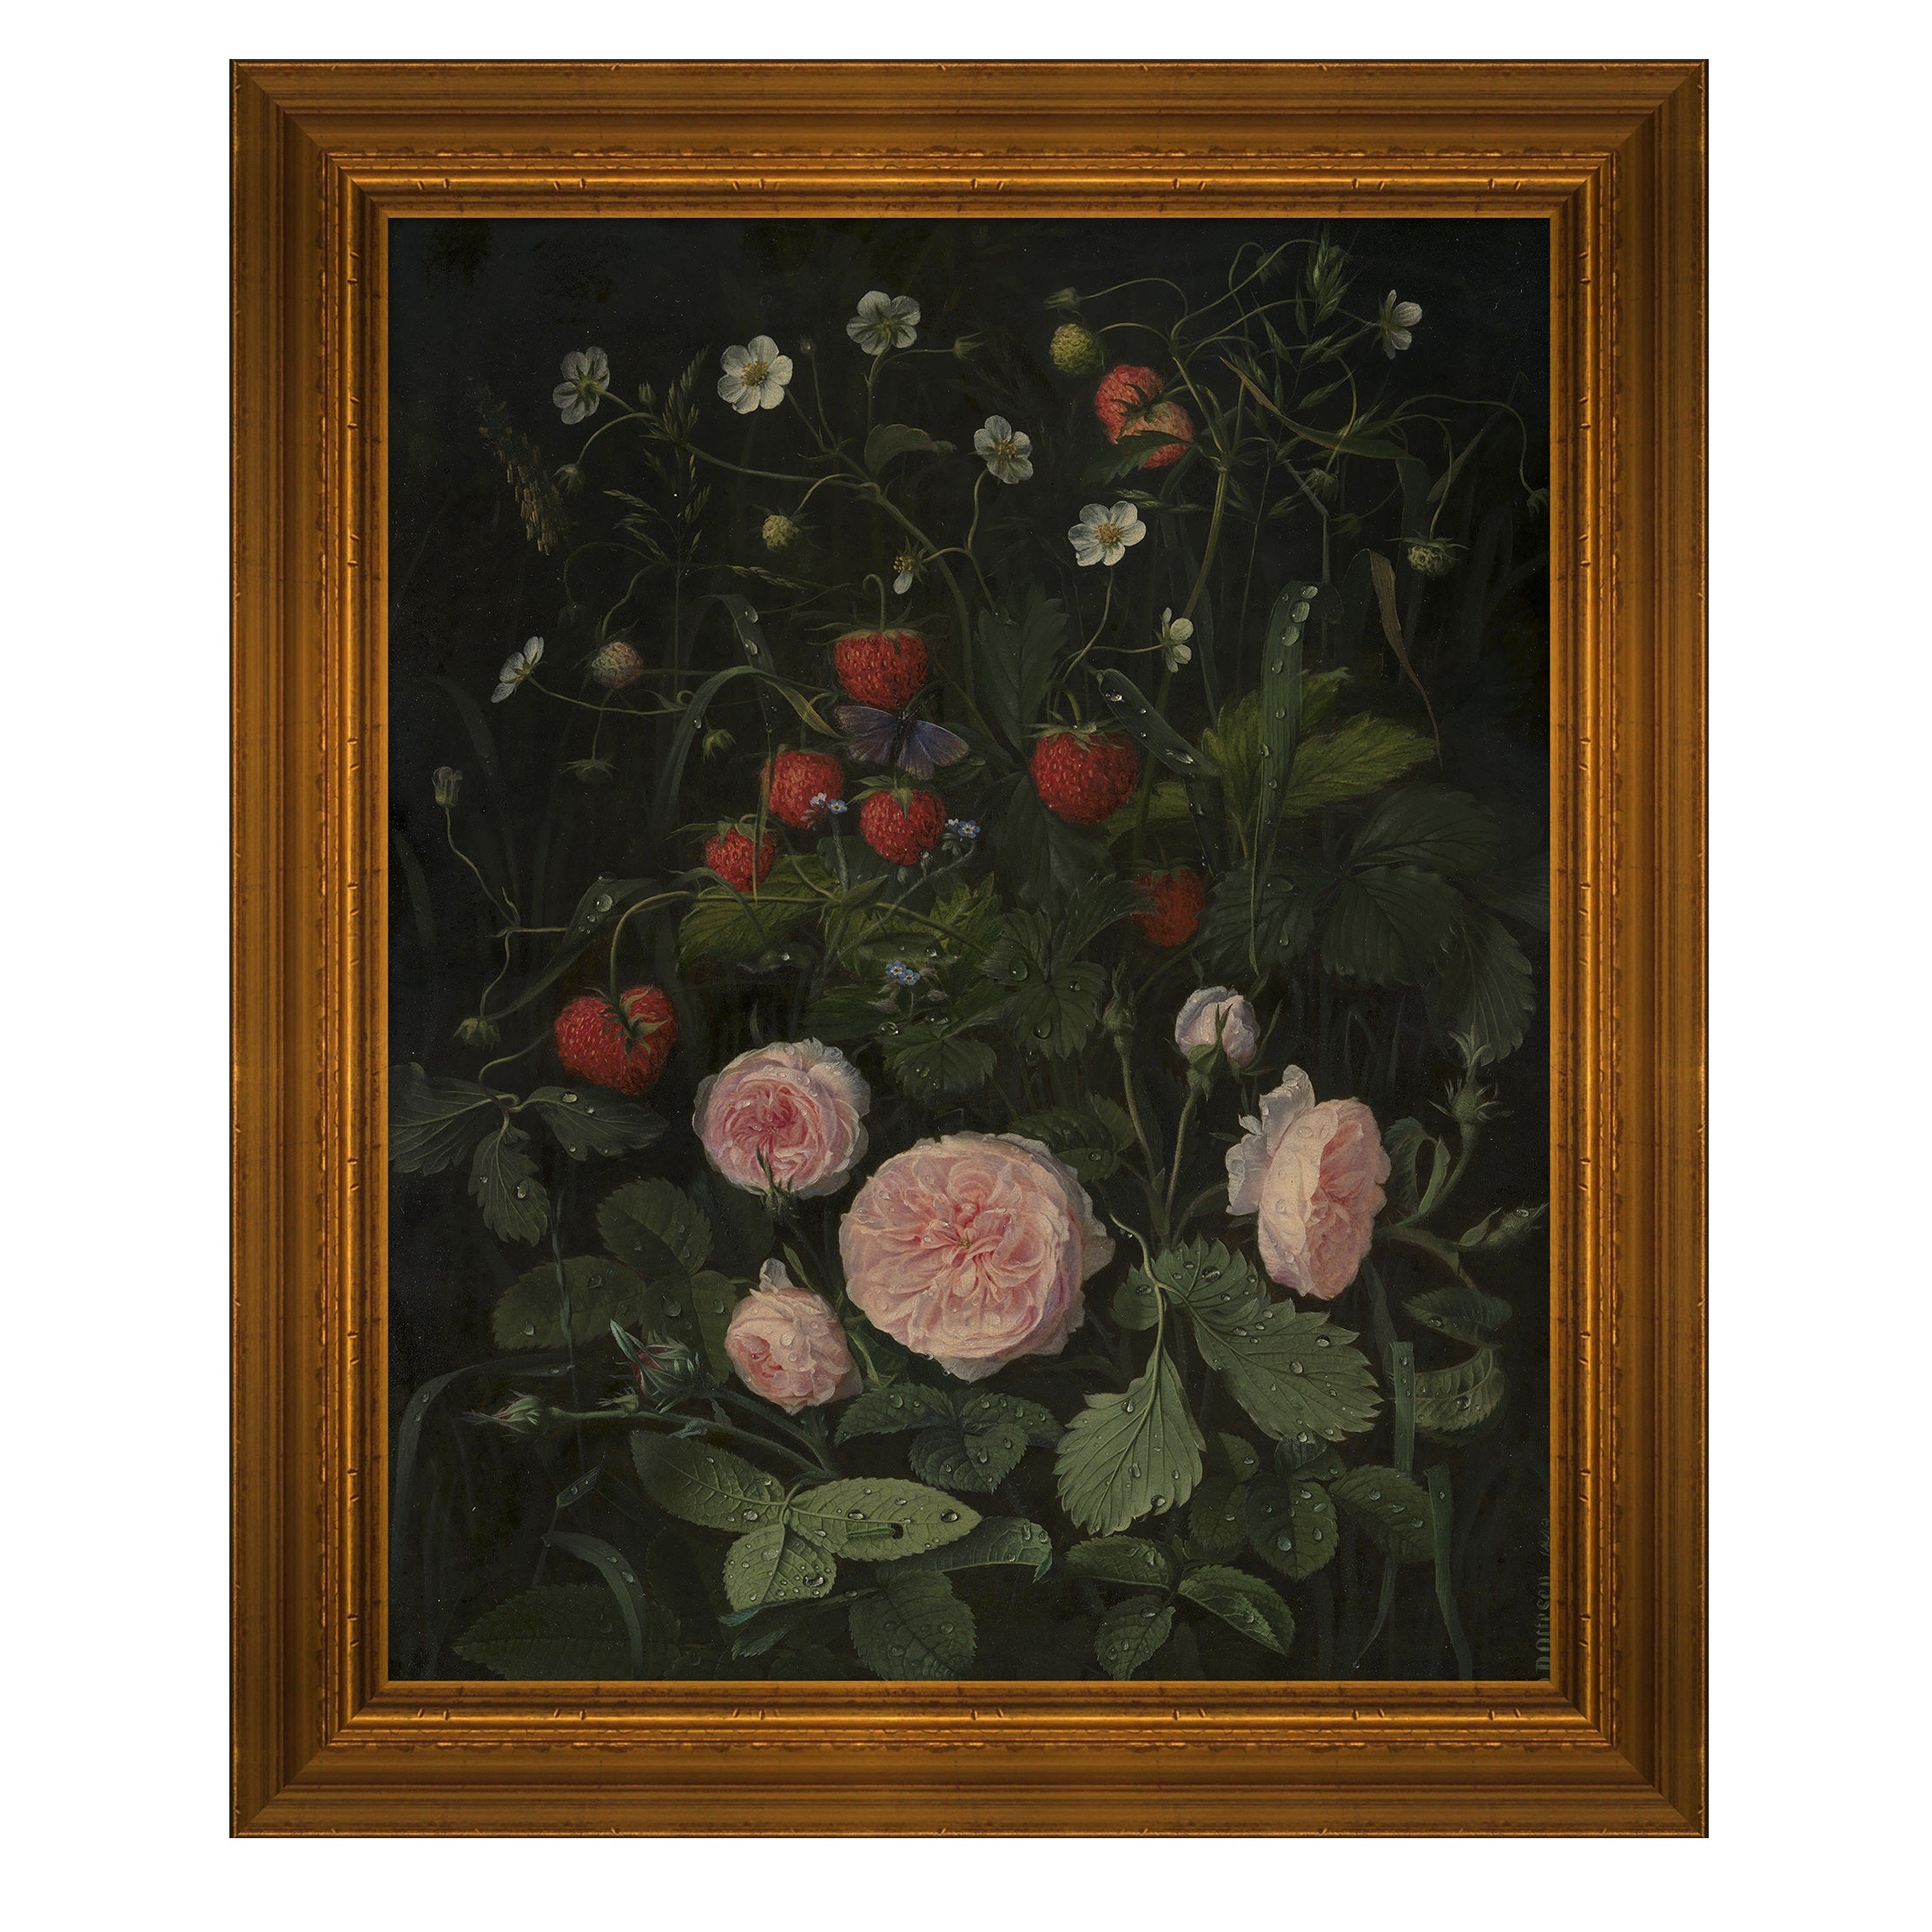 Framed wall art called Still Life with Strawberries and Roses